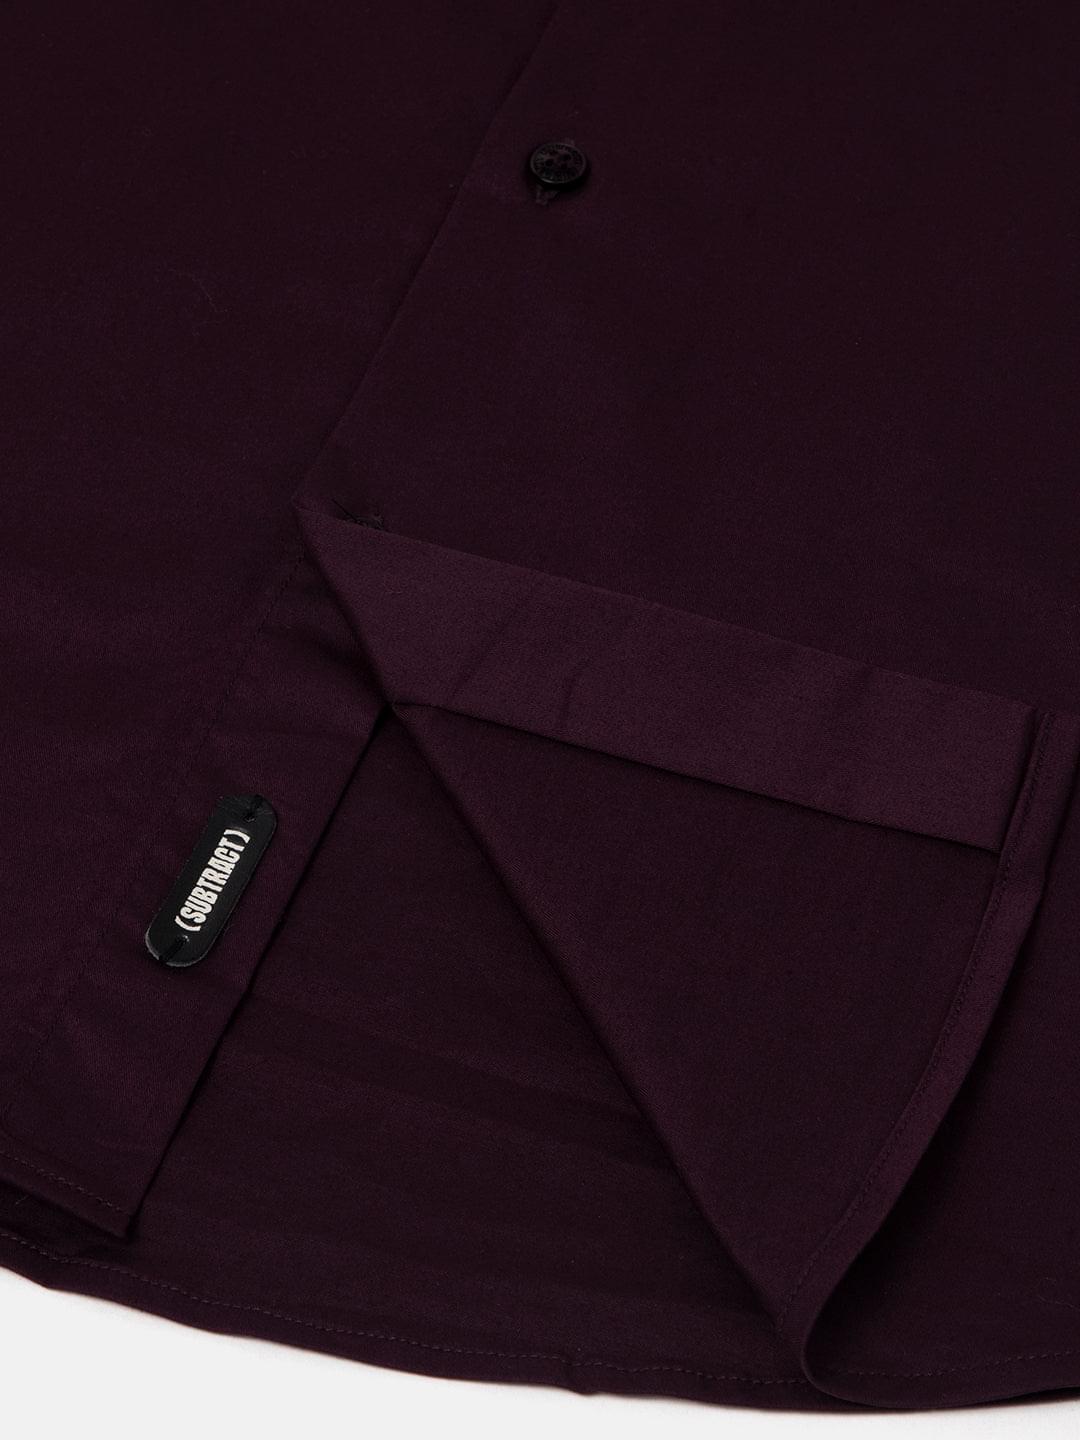 Satin Evening Shirt in Wine with Stretch - Slim Fit